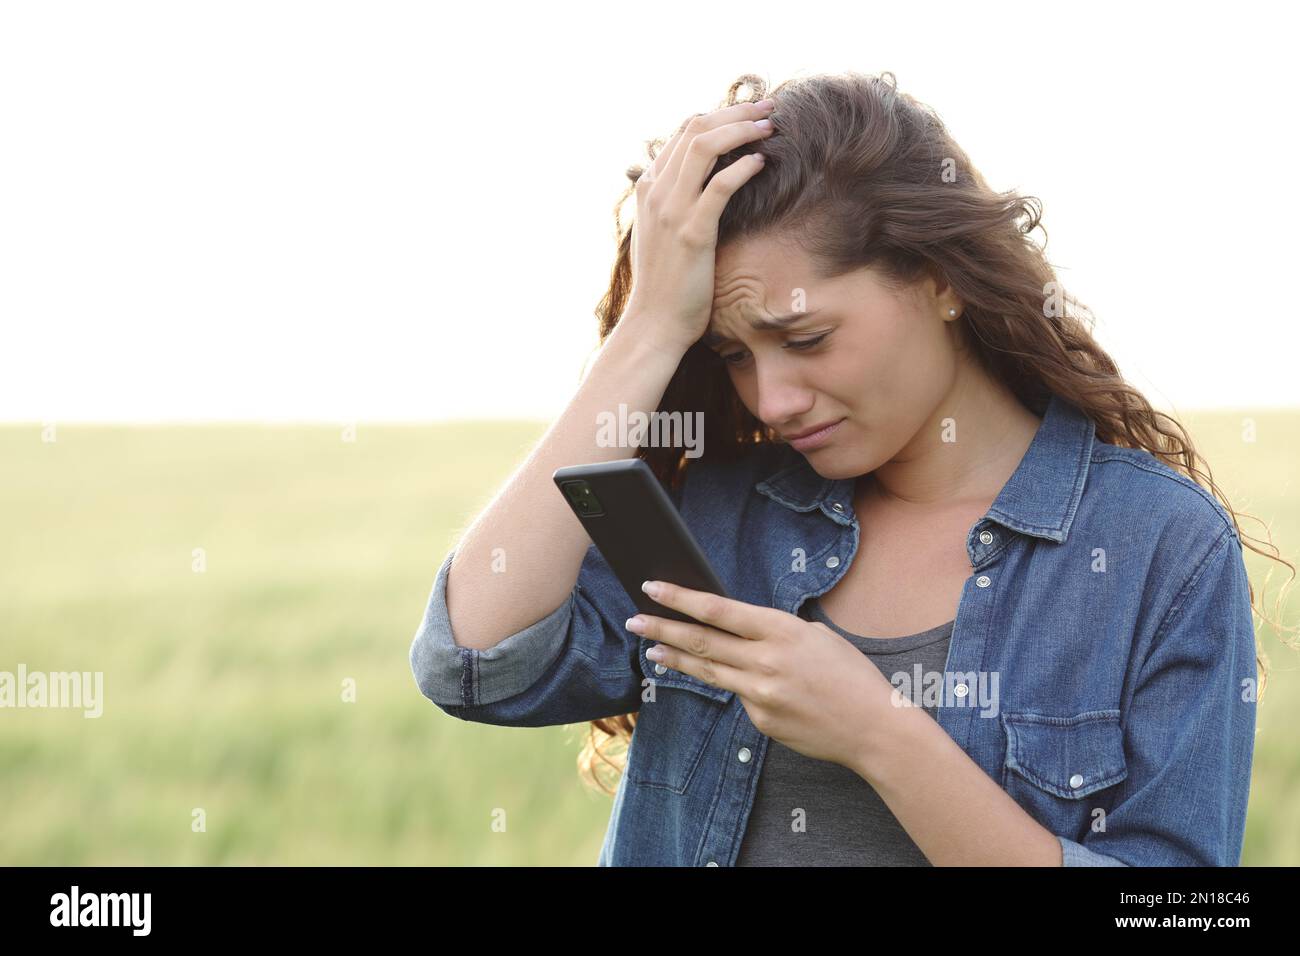 Sad woman checking smart phone standing in a wheat field Stock Photo